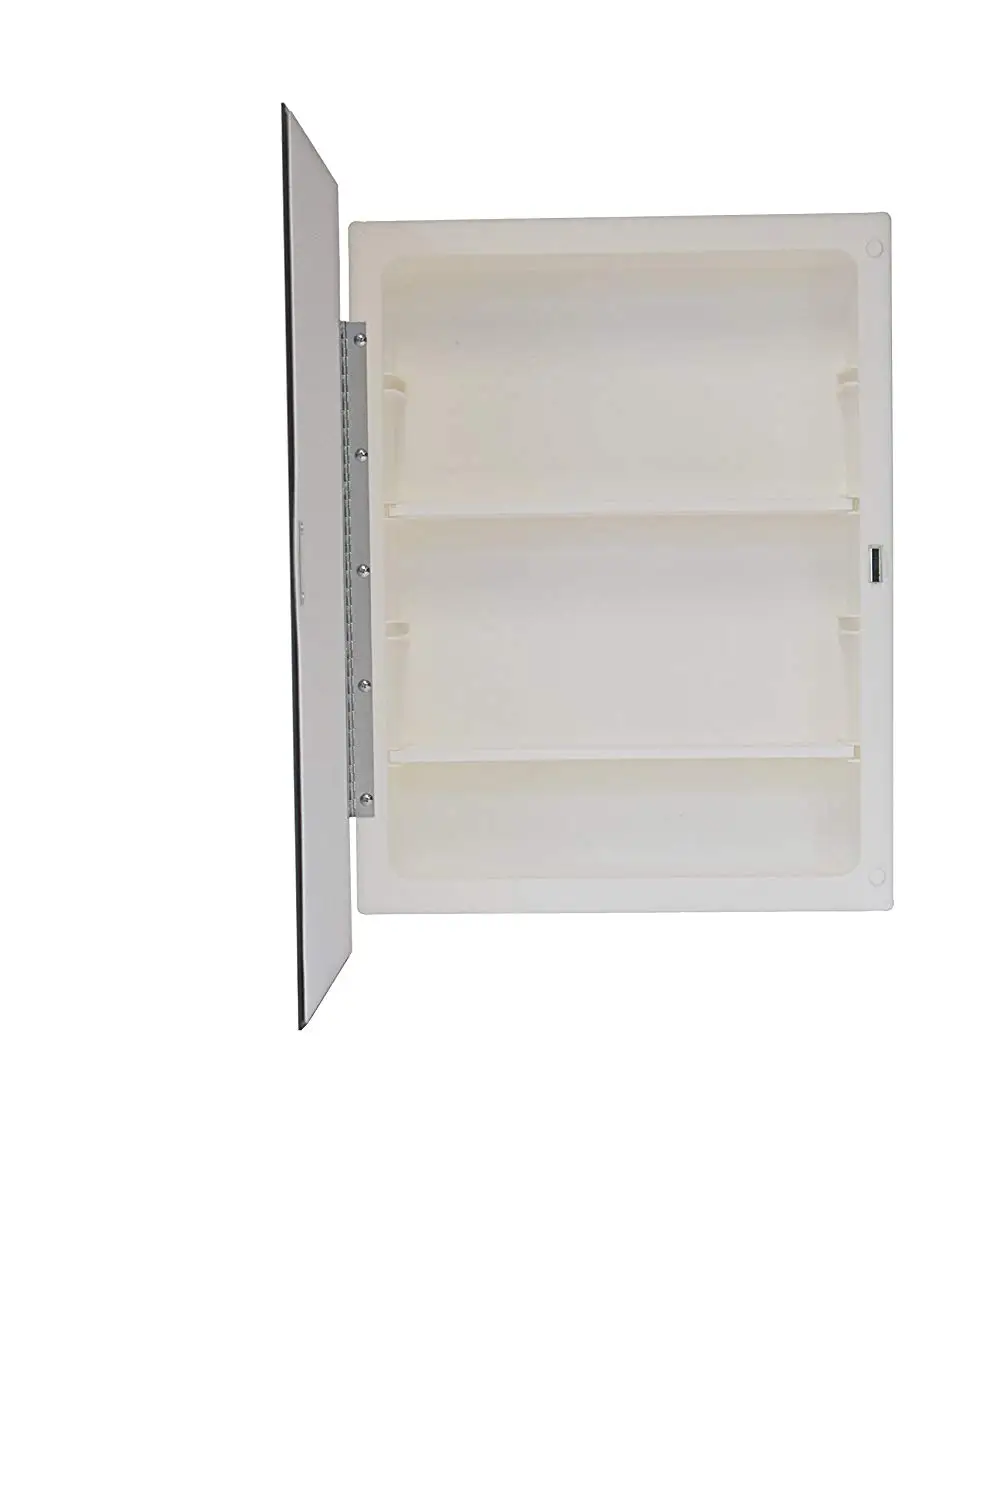 Buy Bathroom Cabinet Wooden 3 Shelves Mirror Front In Cheap